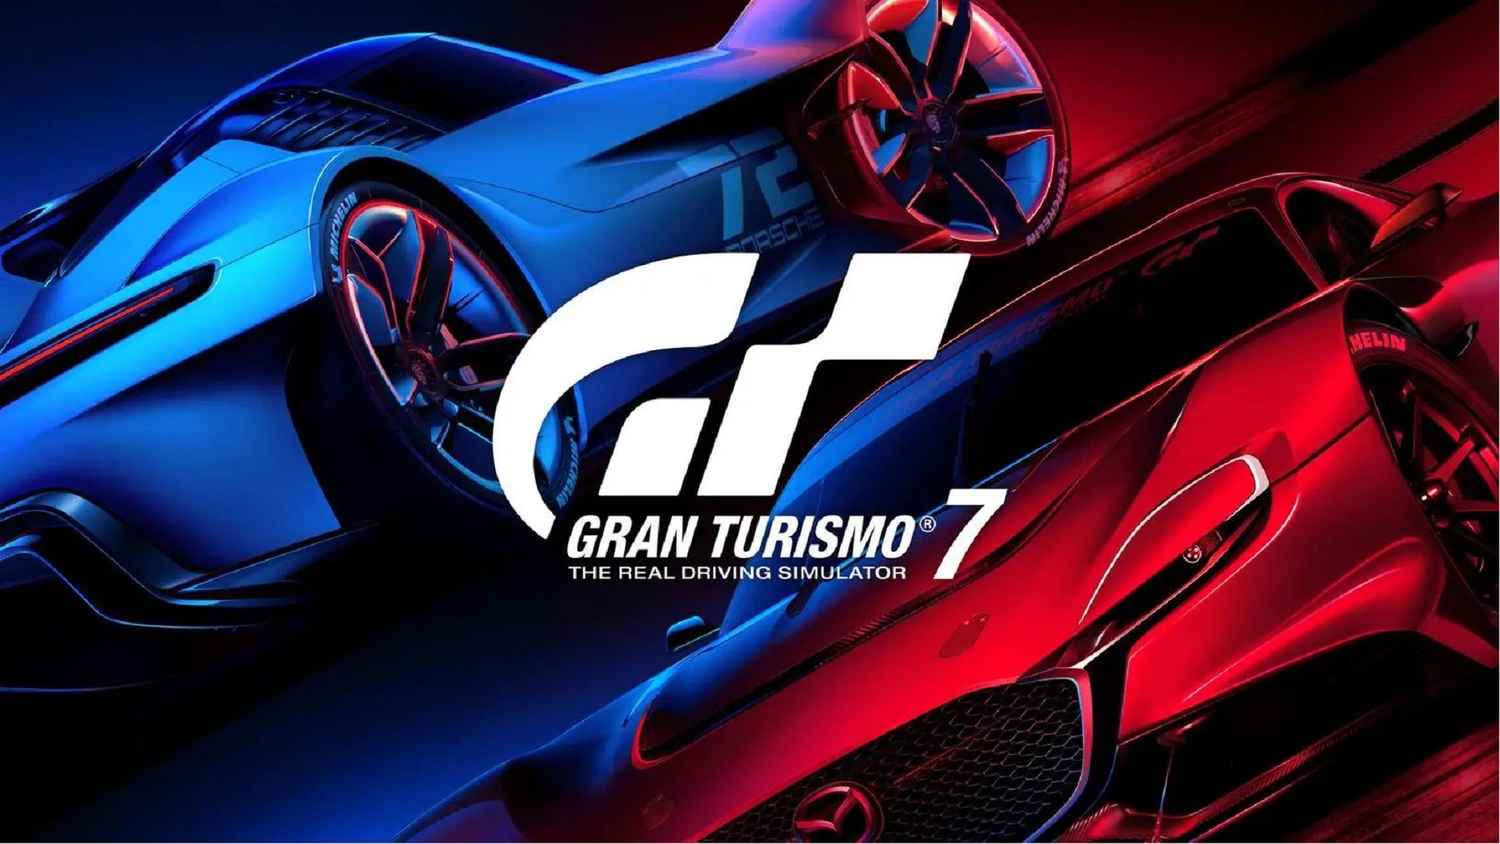 Gran Turismo trailer shows us that video game movies are here to stay | Digit